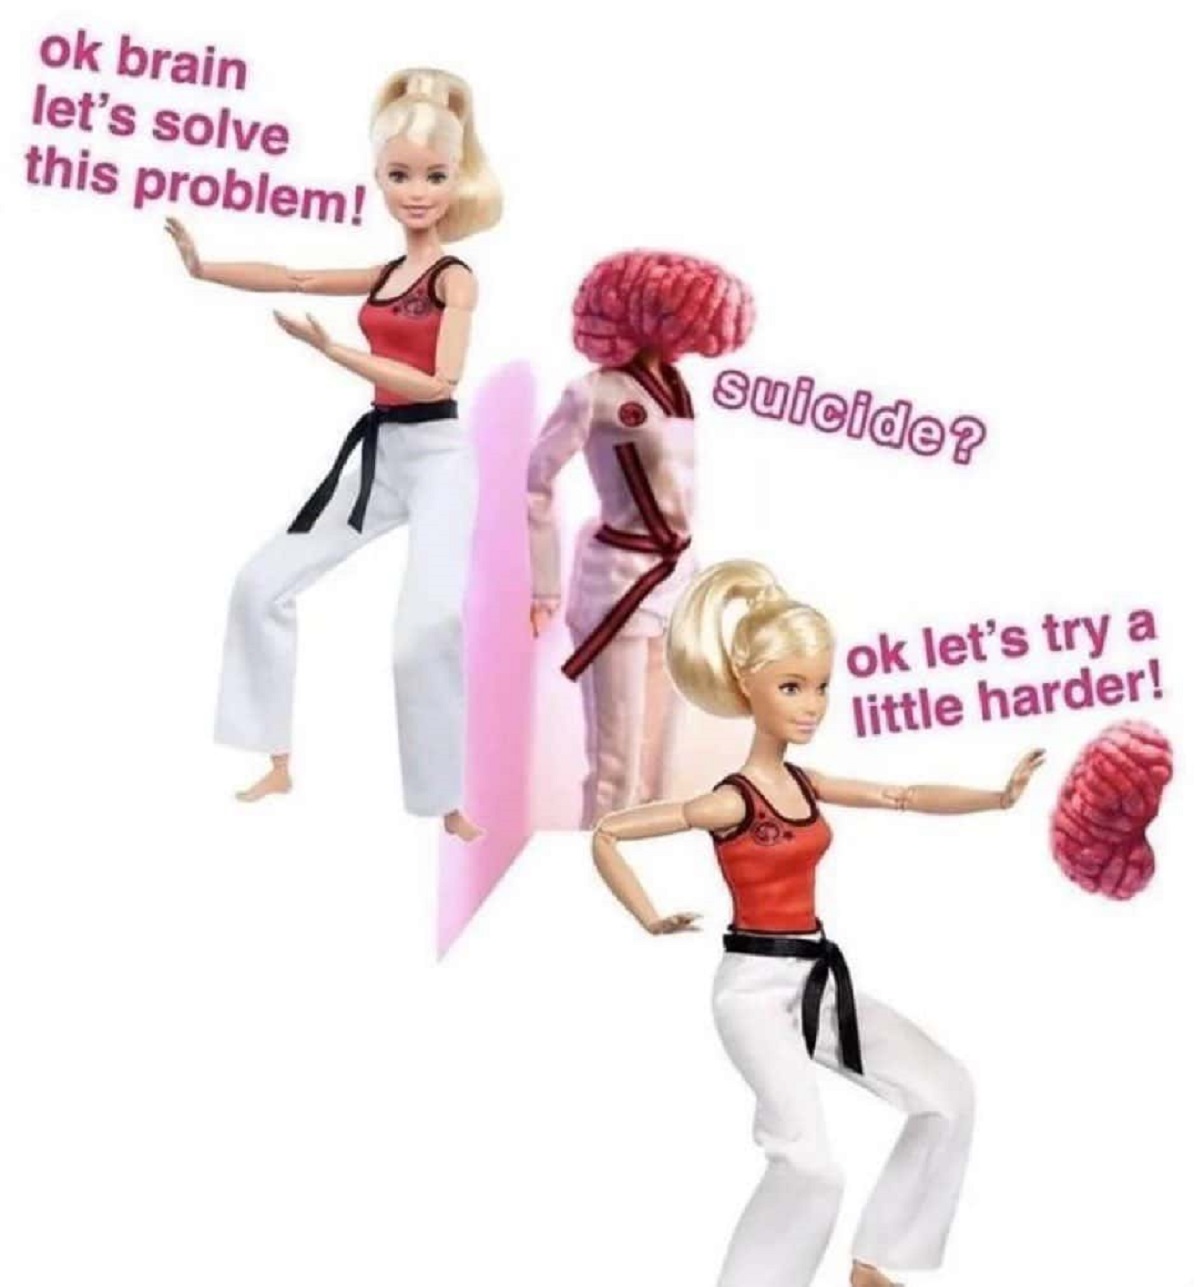 barbie made to move karate doll - ok brain let's solve this problem! suicide? ok let's try a little harder!